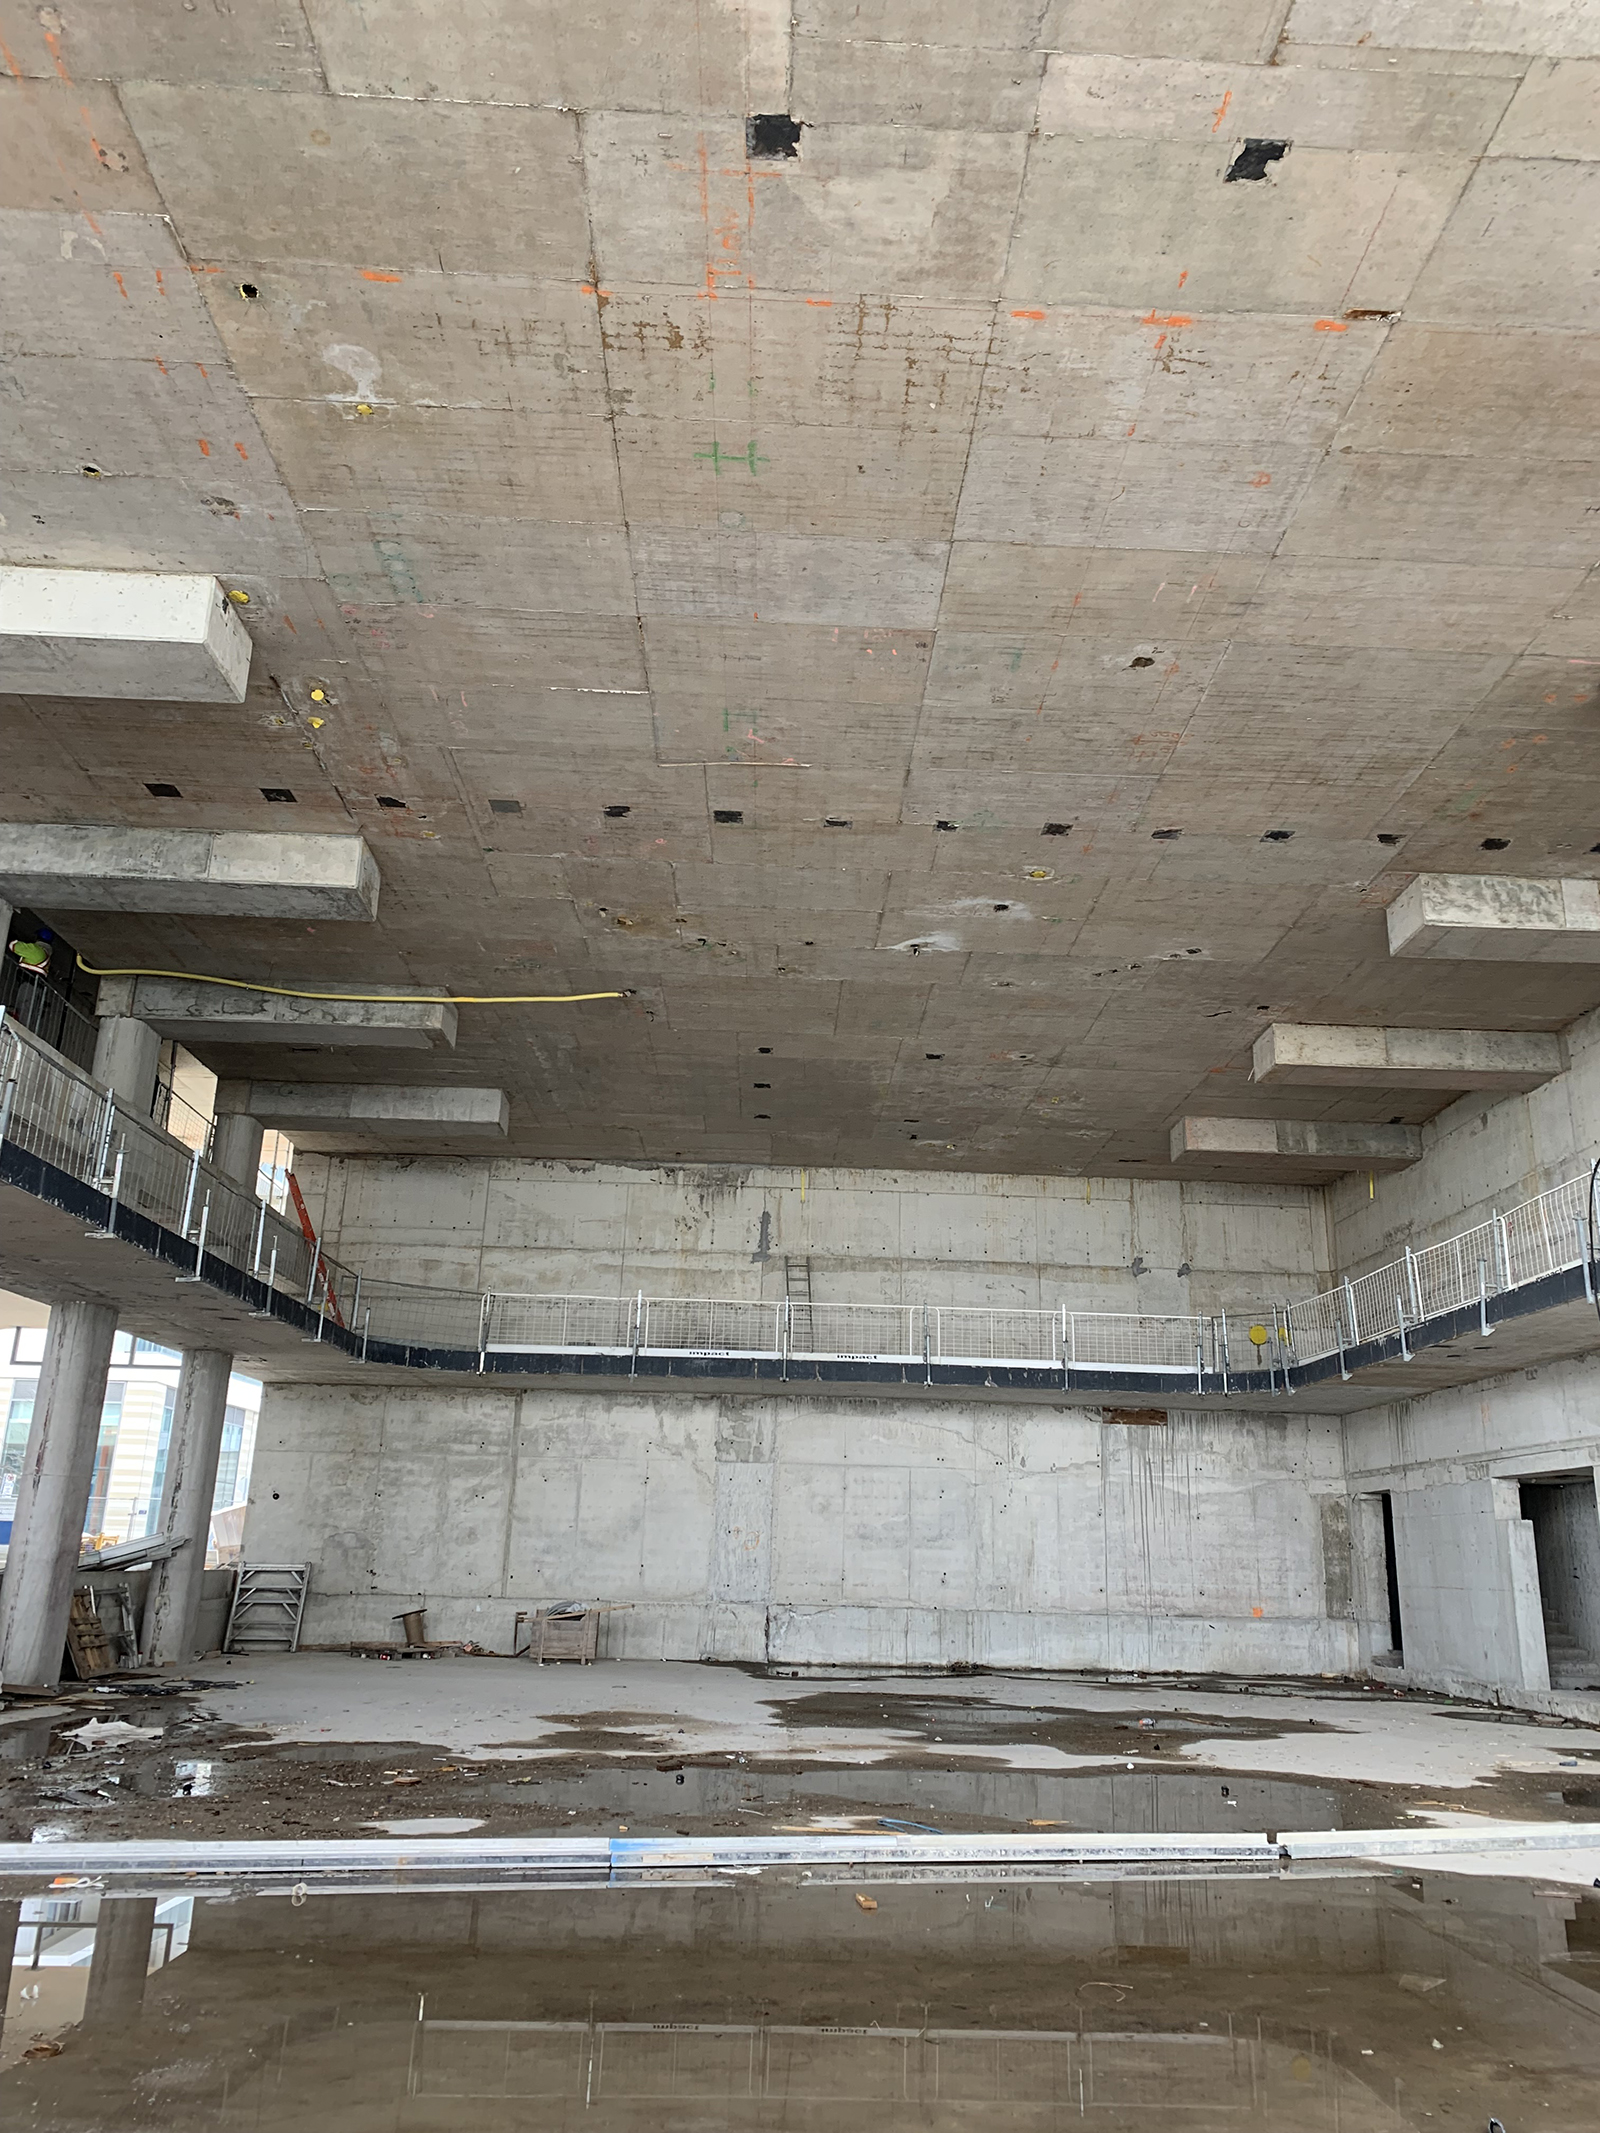 Photograph of the construction for the new East Bayfront Community Recreation Centre, showing the indoor double gymnasium under construction with concrete.